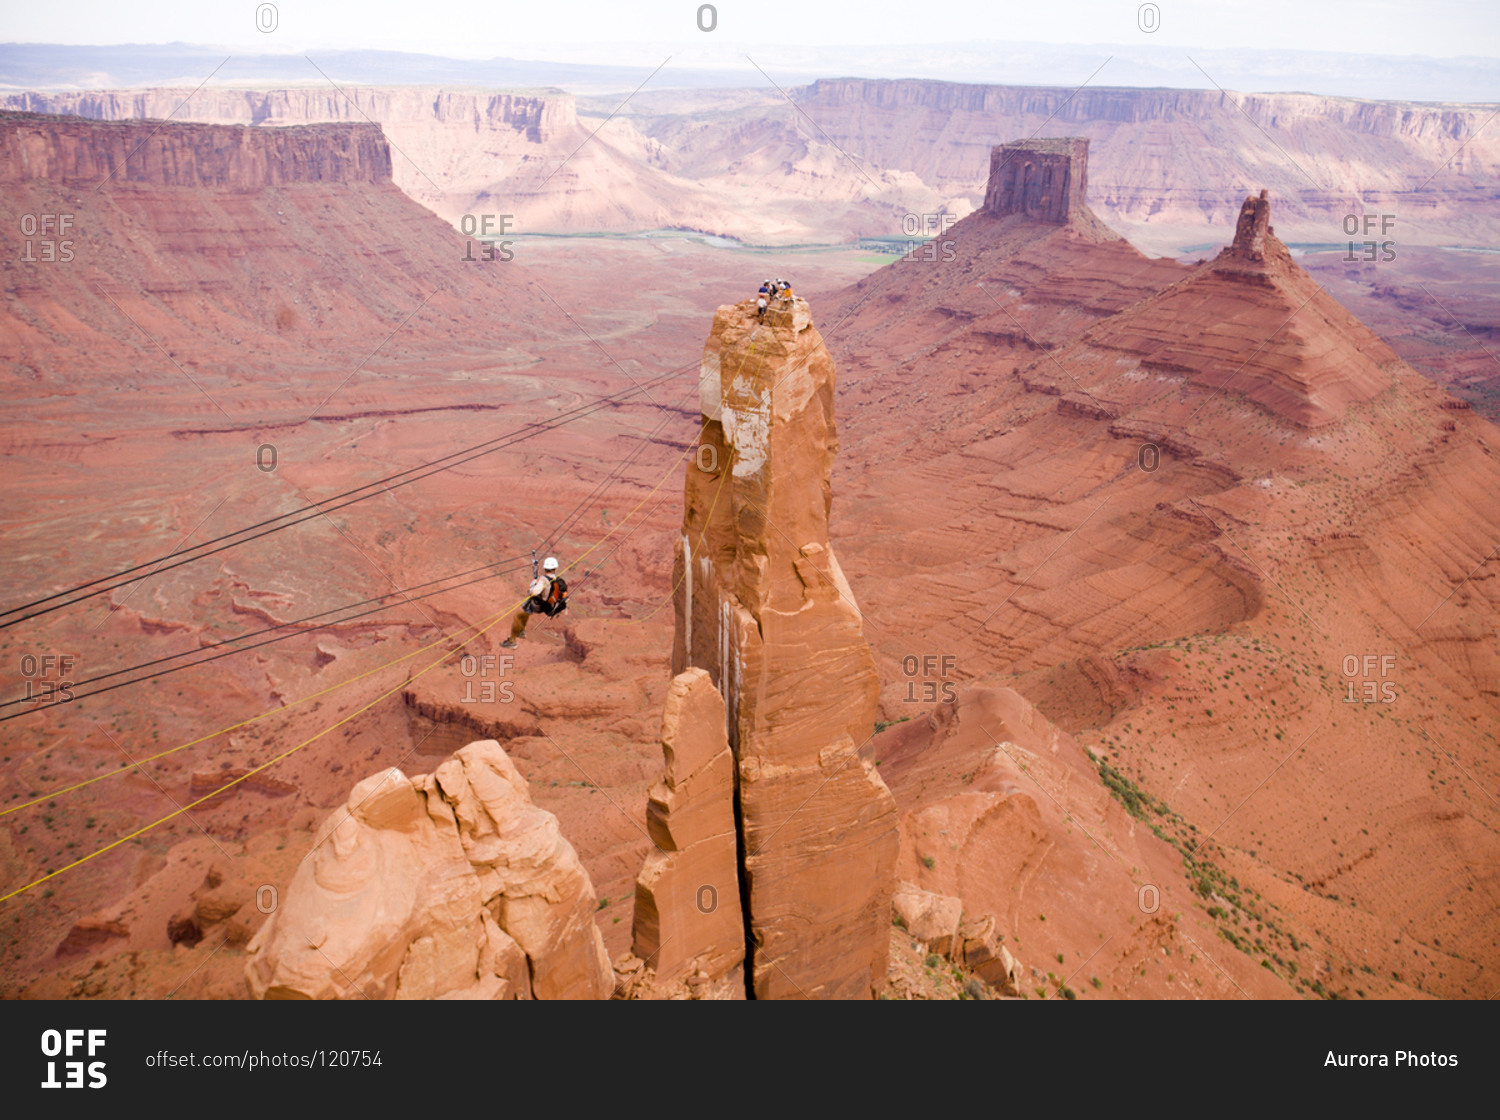 Adventure racer on a Tyrolean Traverse high above the desert in a race in Moab Utah.